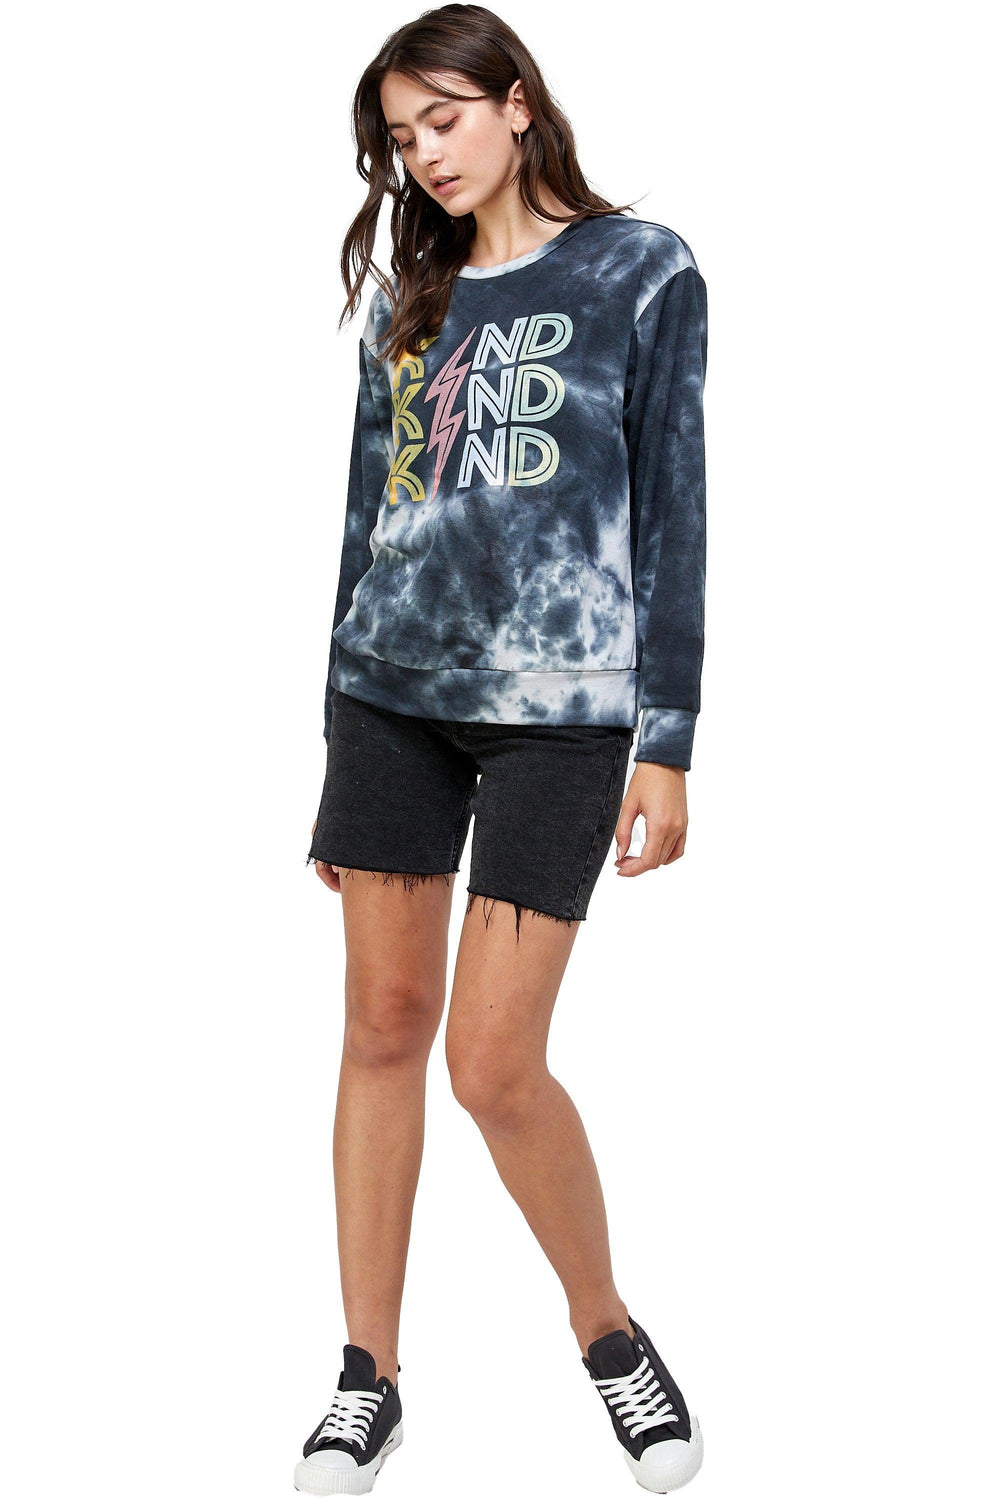 French Terry Tie Dye Screen Printed Sweatshirts - Brand My Case